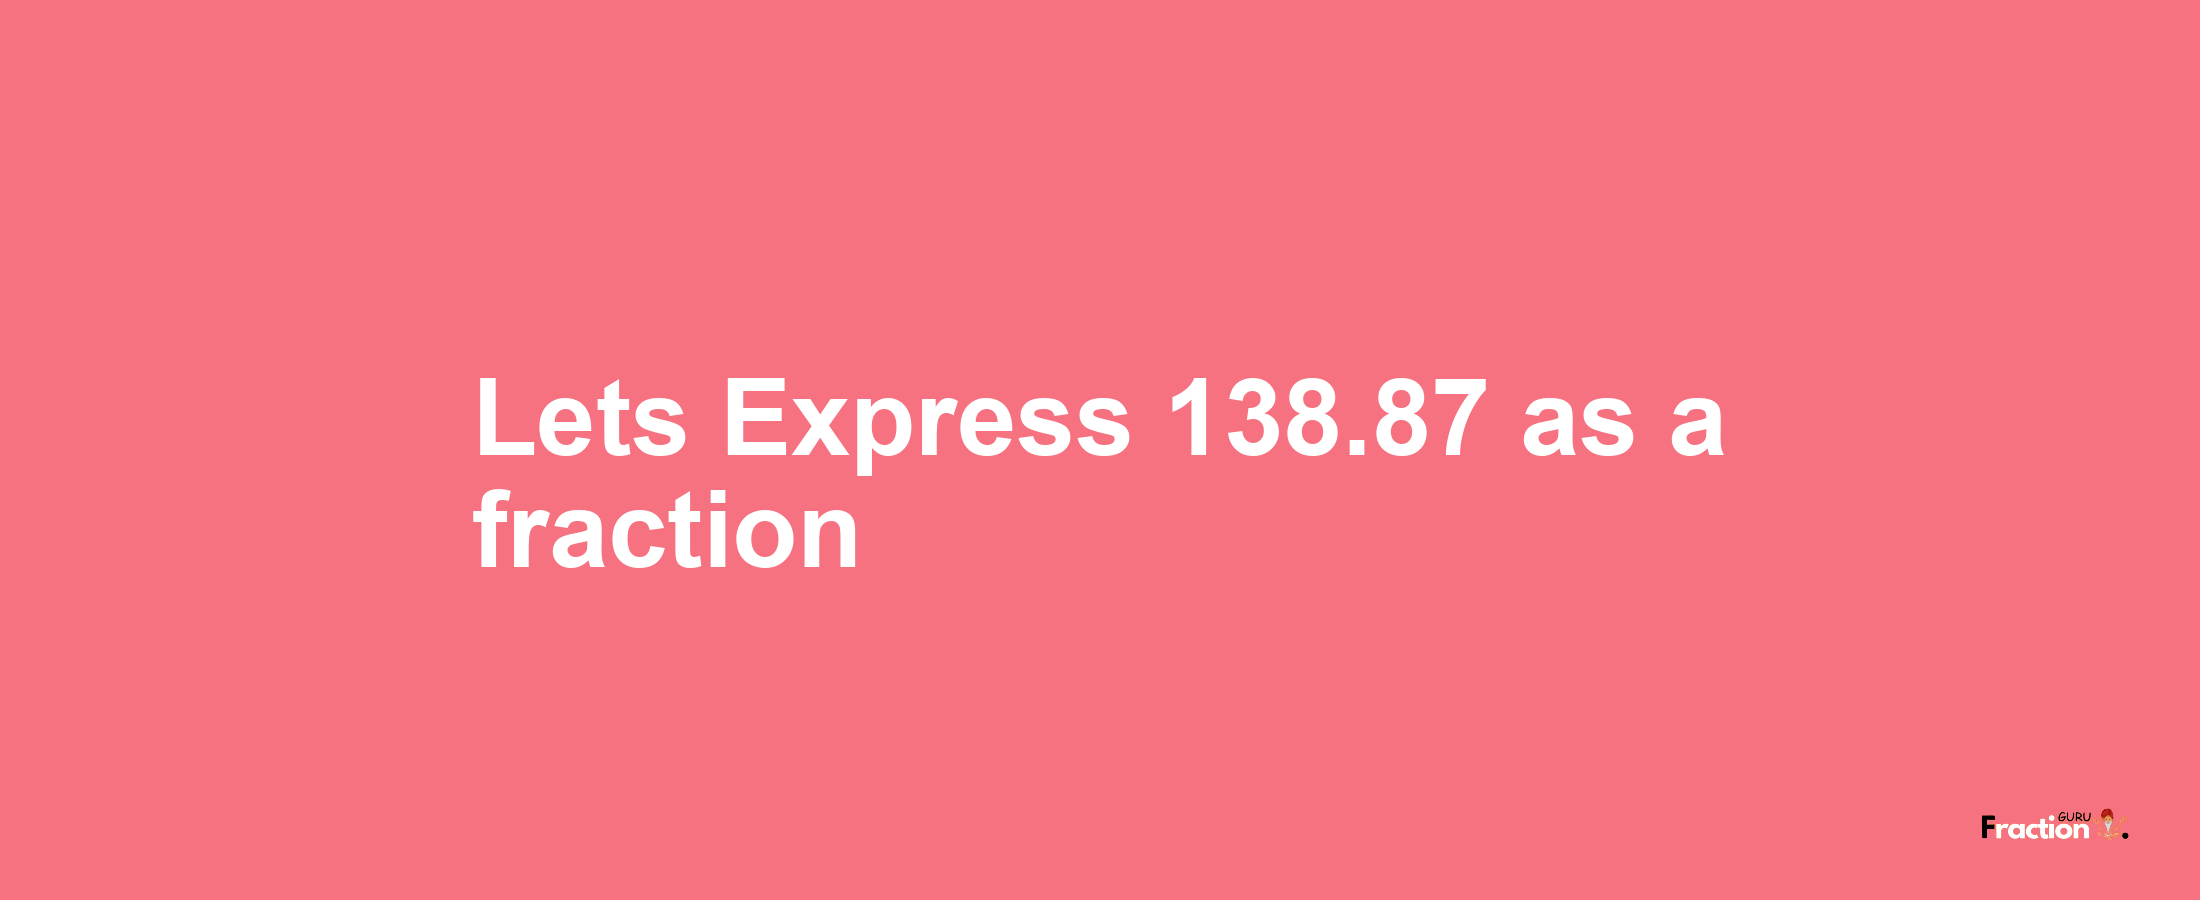 Lets Express 138.87 as afraction